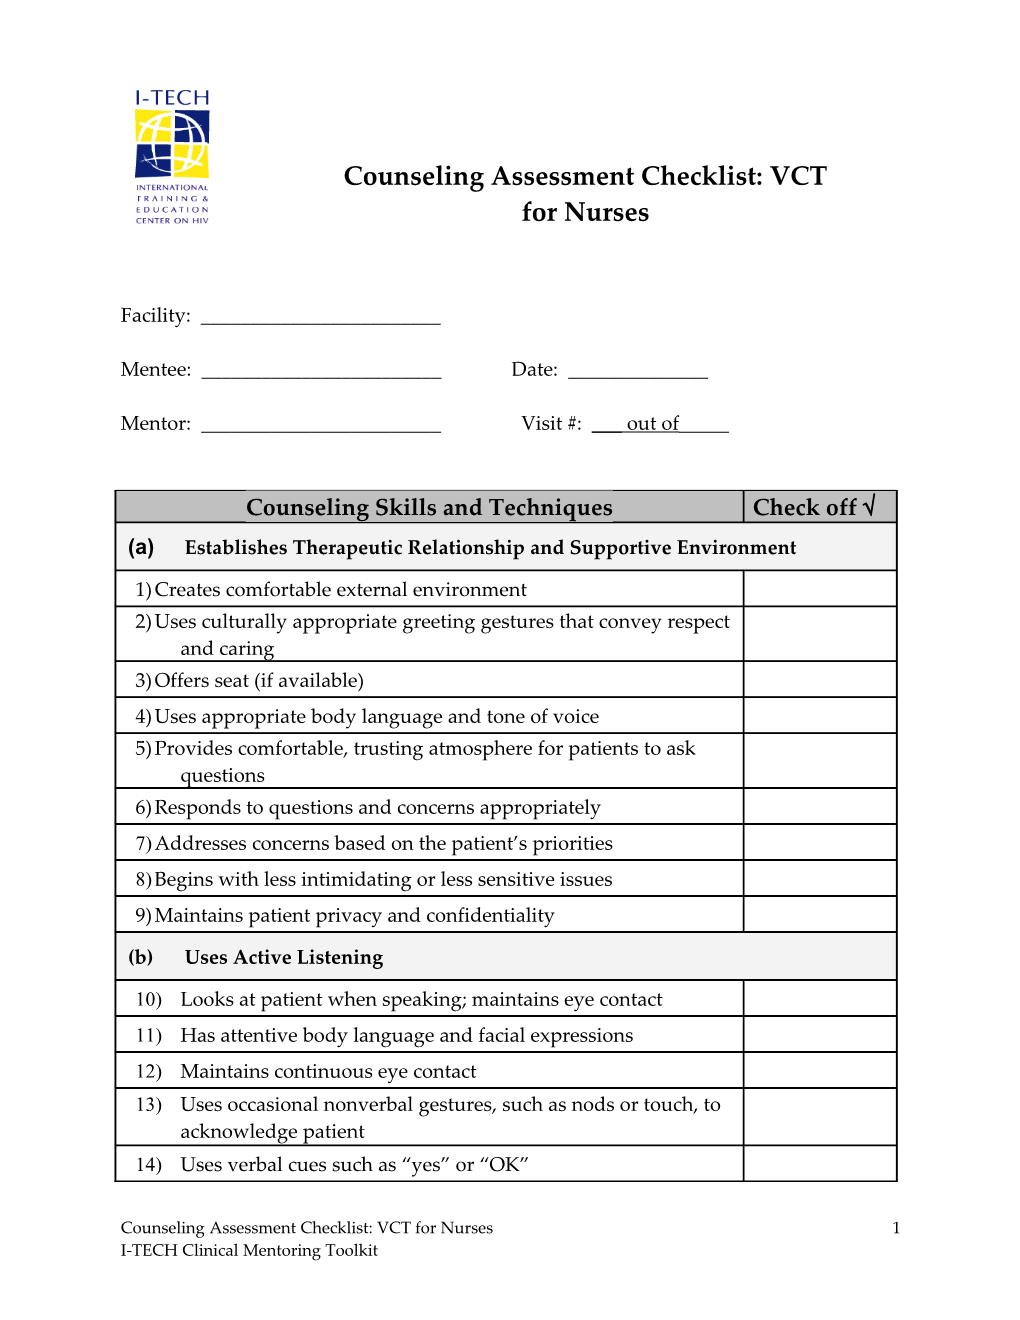 Counseling Assessment Checklist - Adherence